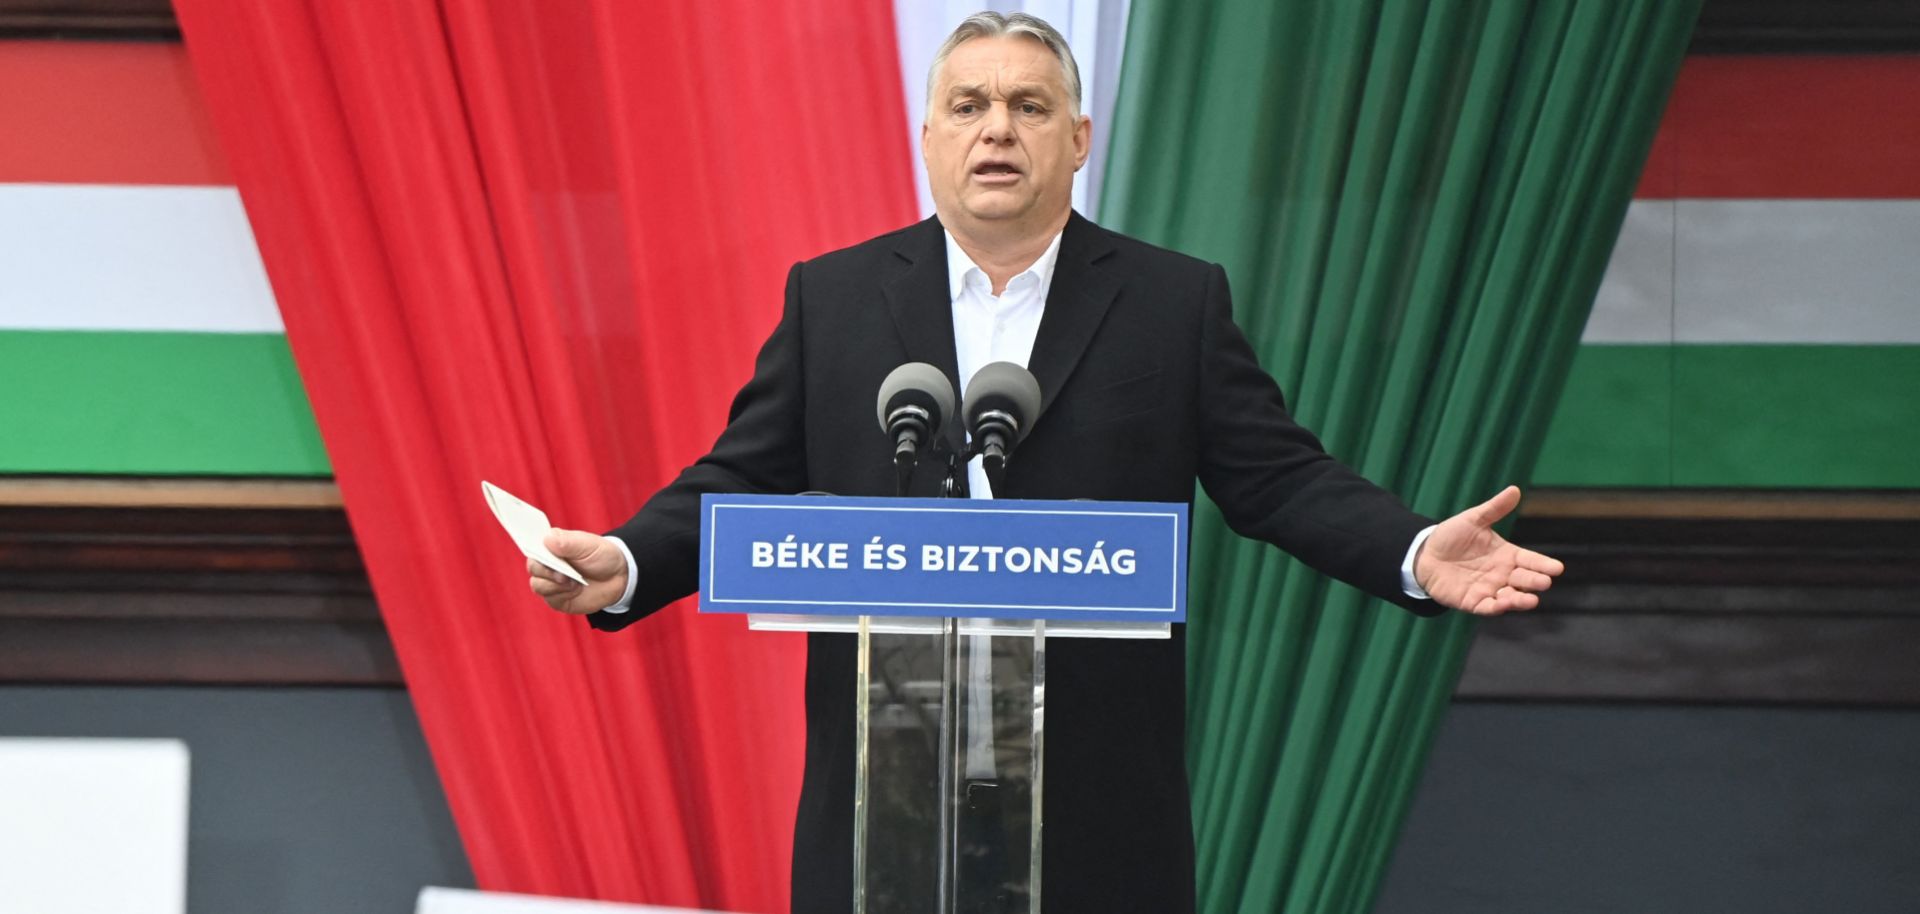 Hungarian Prime Minister Viktor Orban speaks on stage during a campaign rally for his ruling Fidesz party in Szekesfehervar, Hungary, on April 1, 2022. 